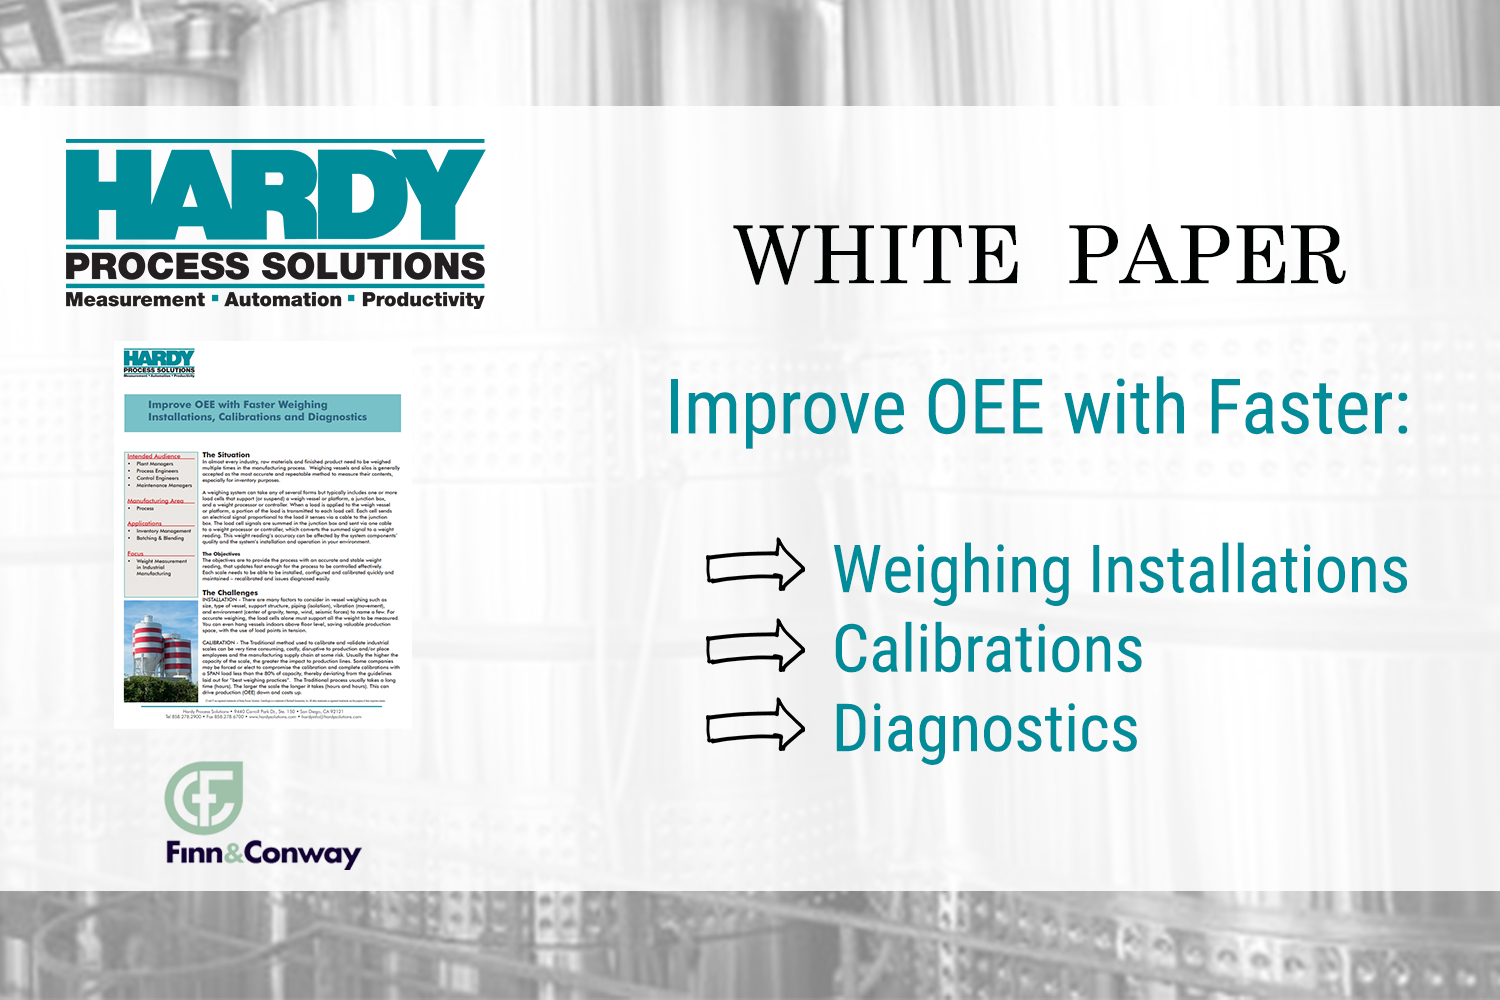 Hardy Process Solutions White Paper - Improved OEE